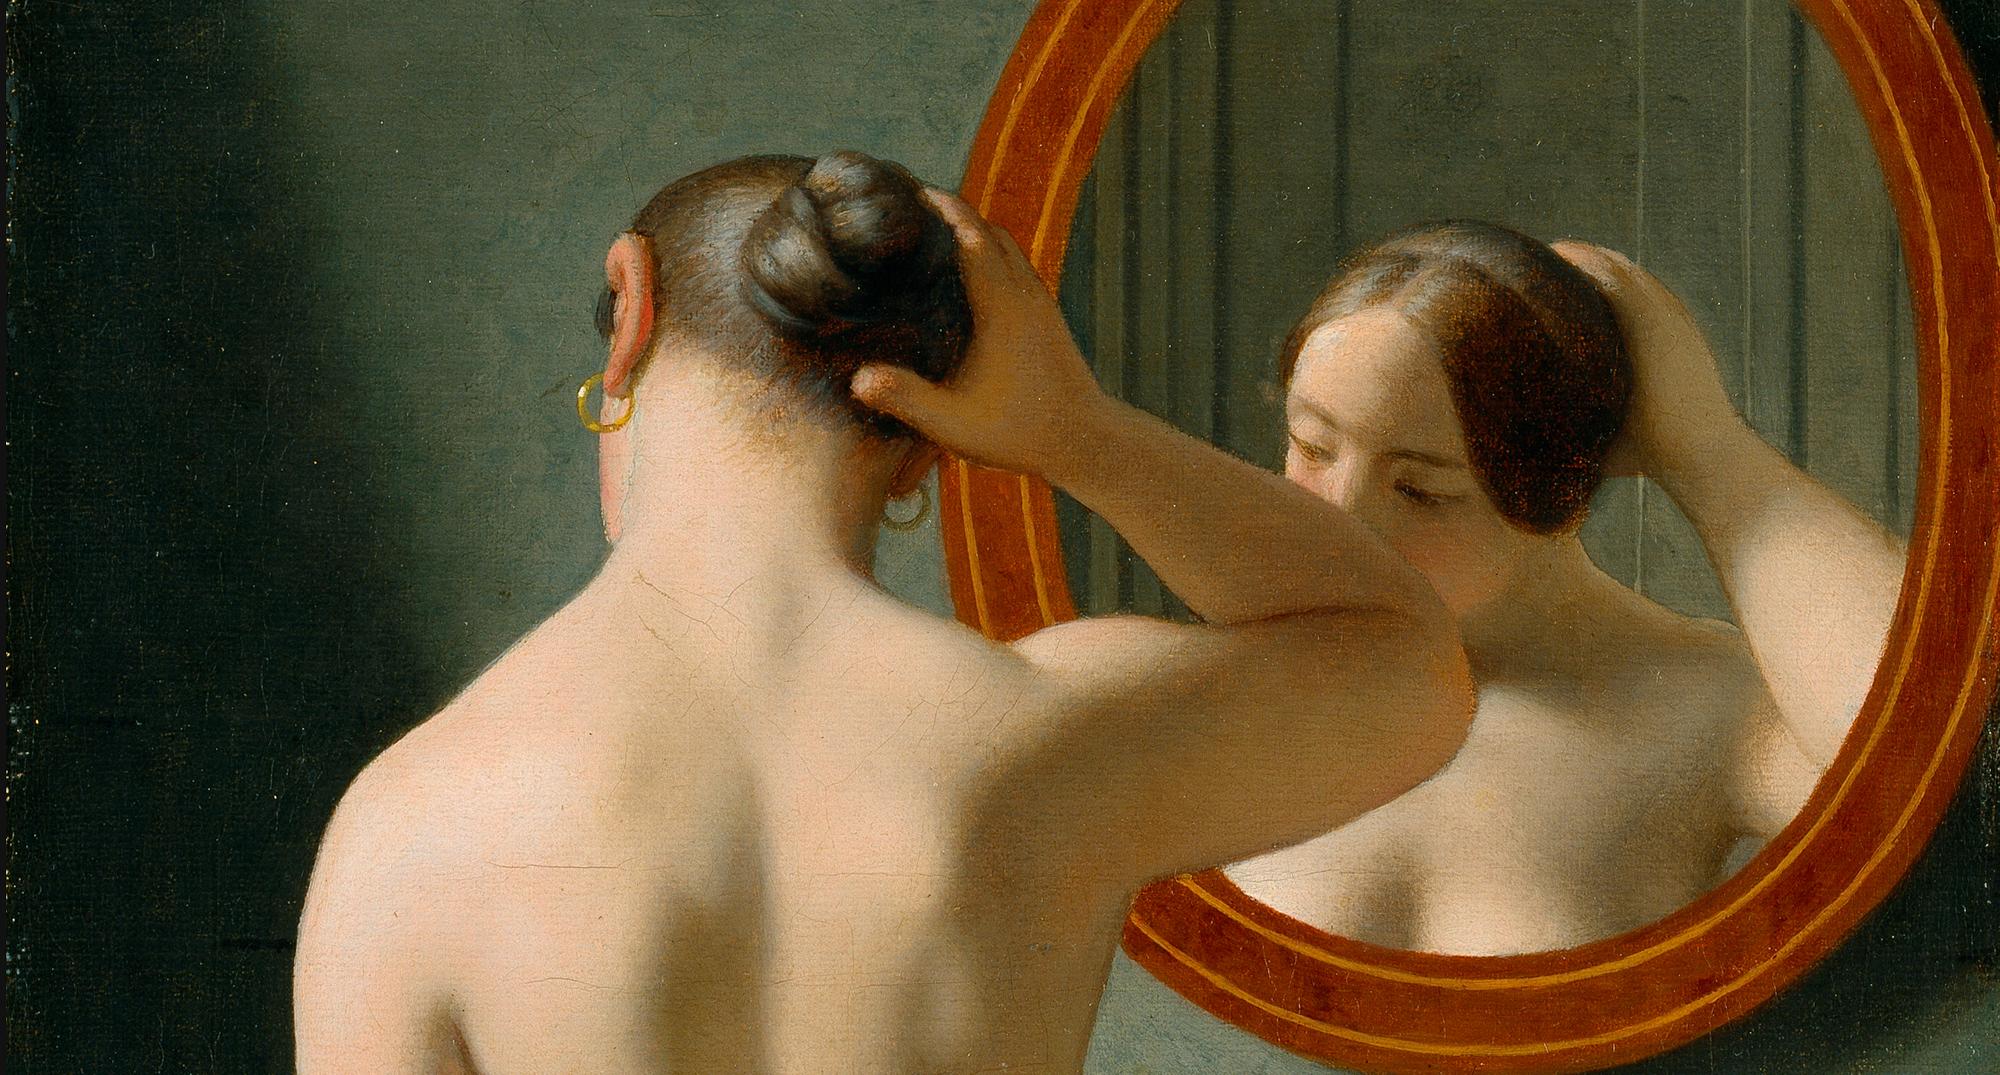 C.W. Eckersberg: 'A nude woman doing her hair before a mirror', (1841)
